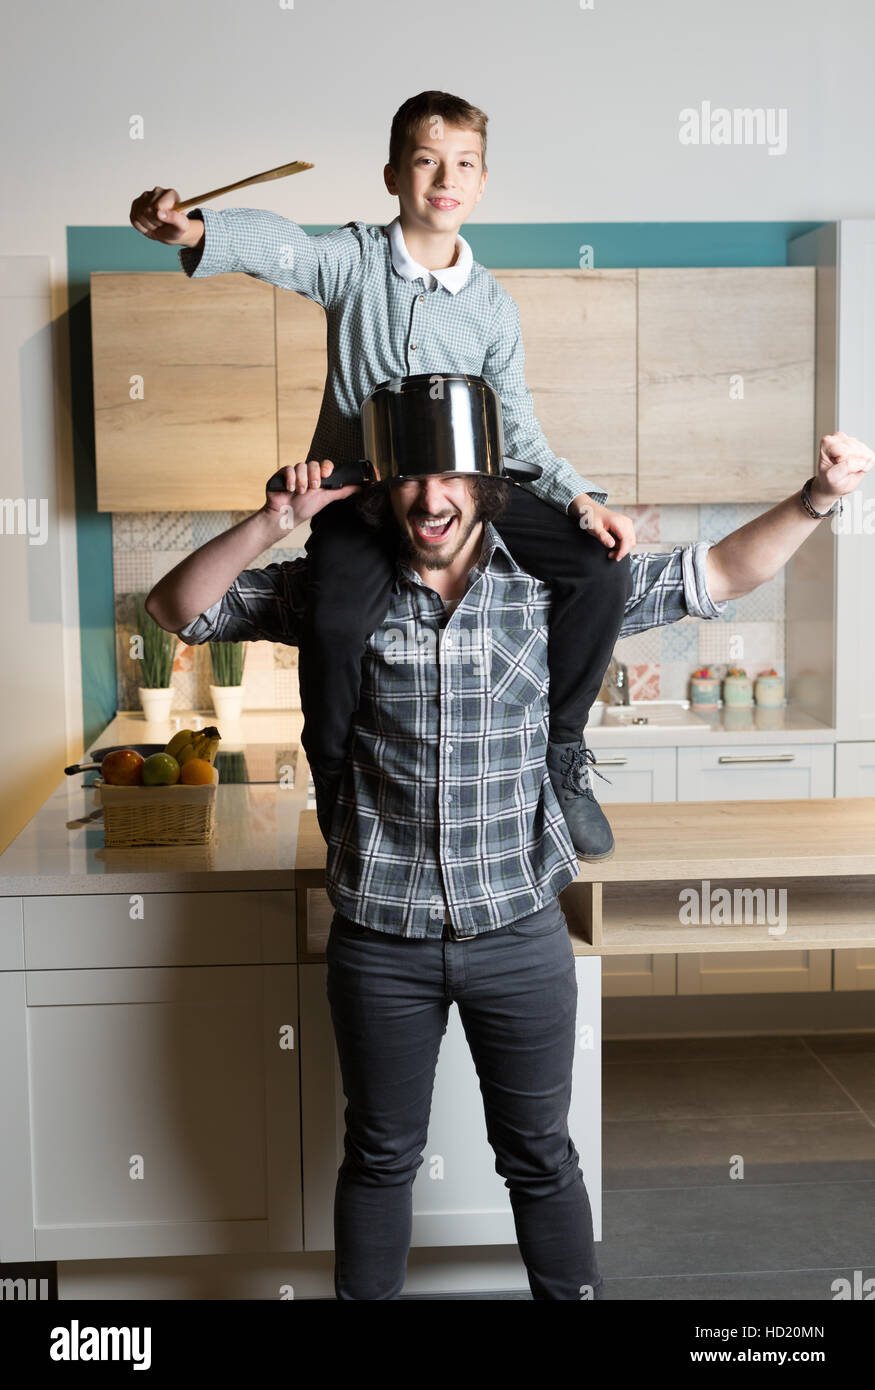 Handsome young father besidet the kitchen table holding his son on his shoulders Stock Photo